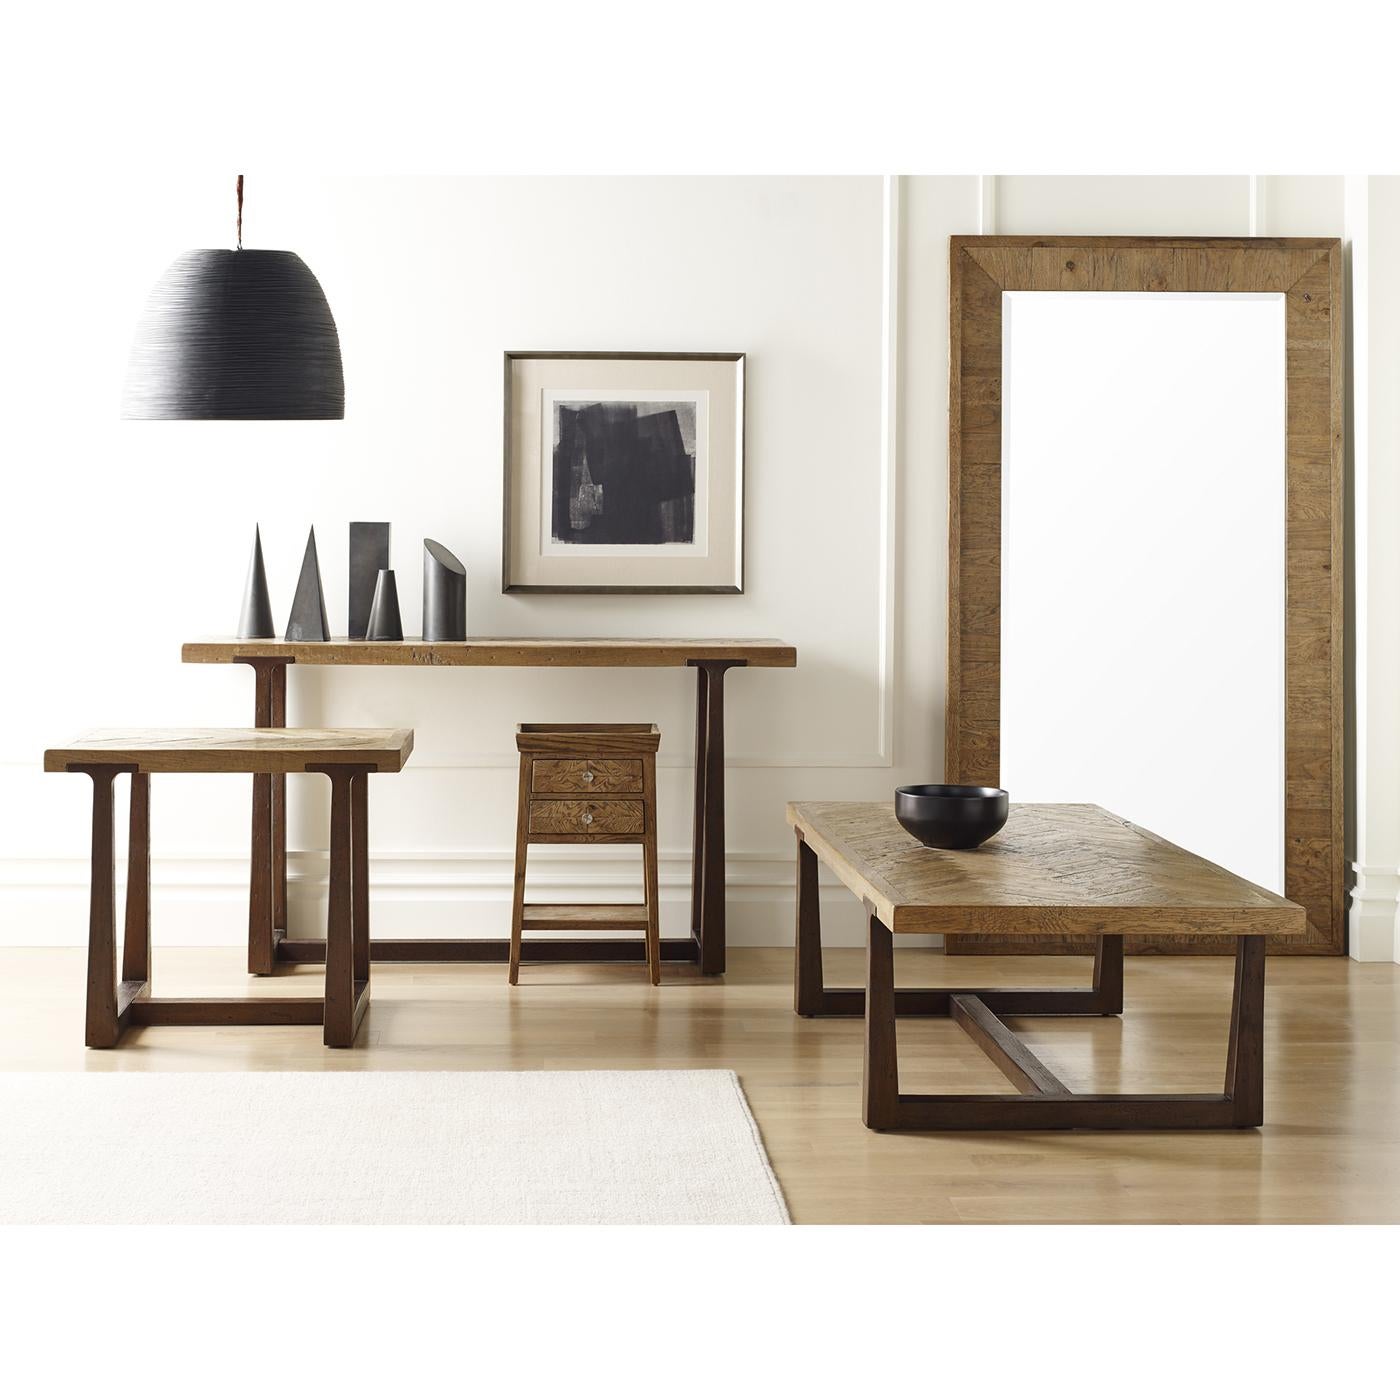 A parquetry oak beveled frame in a light oak finish, with a beveled edge mirror plate. Pre-fitted with hanging strips or can use a large floor dressing mirror.

Dimensions: 42